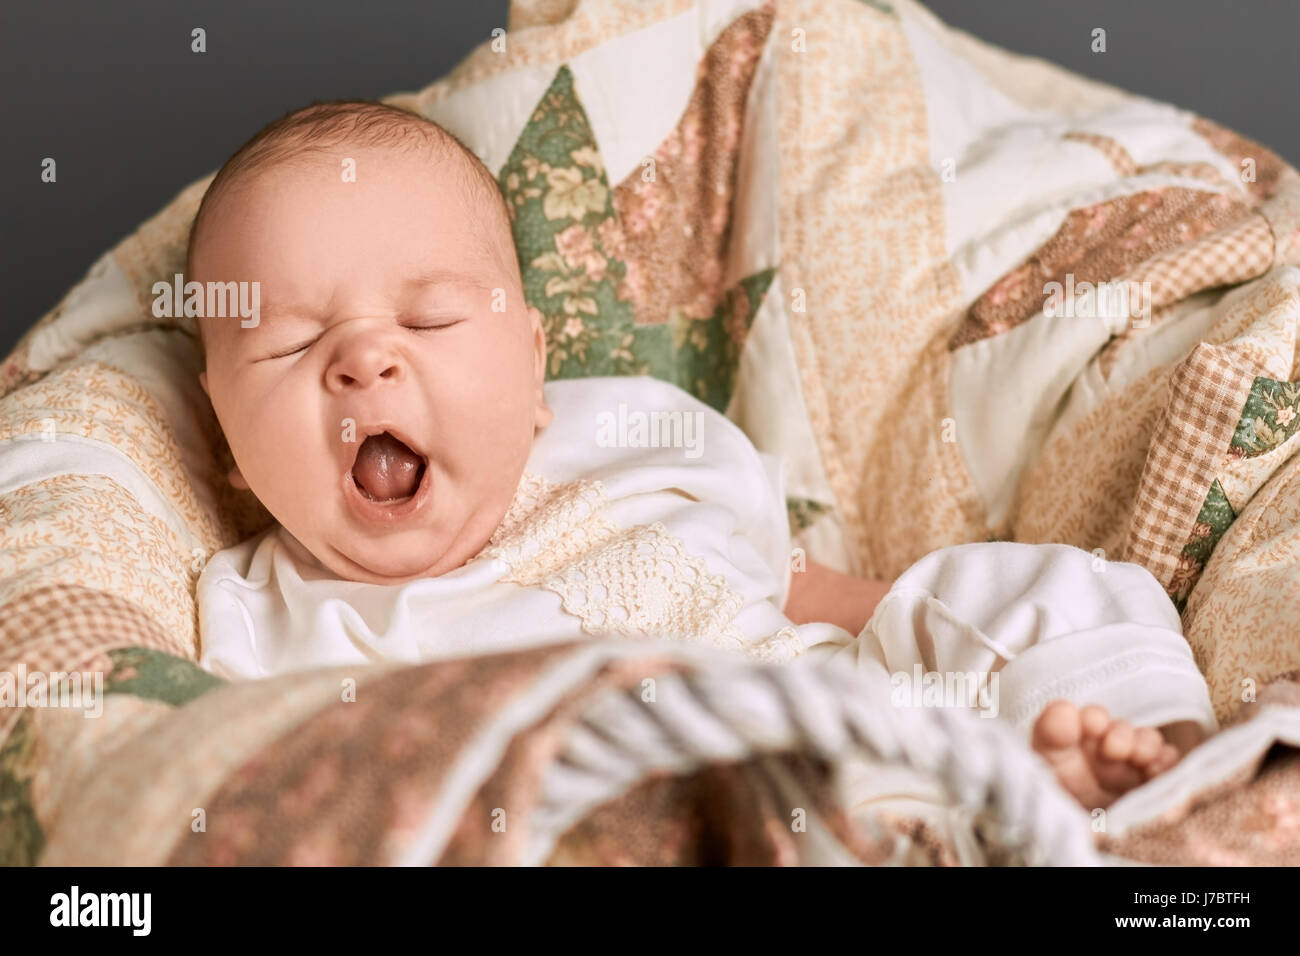 Caucasian baby yawning. Small child with mouth open. Tired signs in infant. Stock Photo